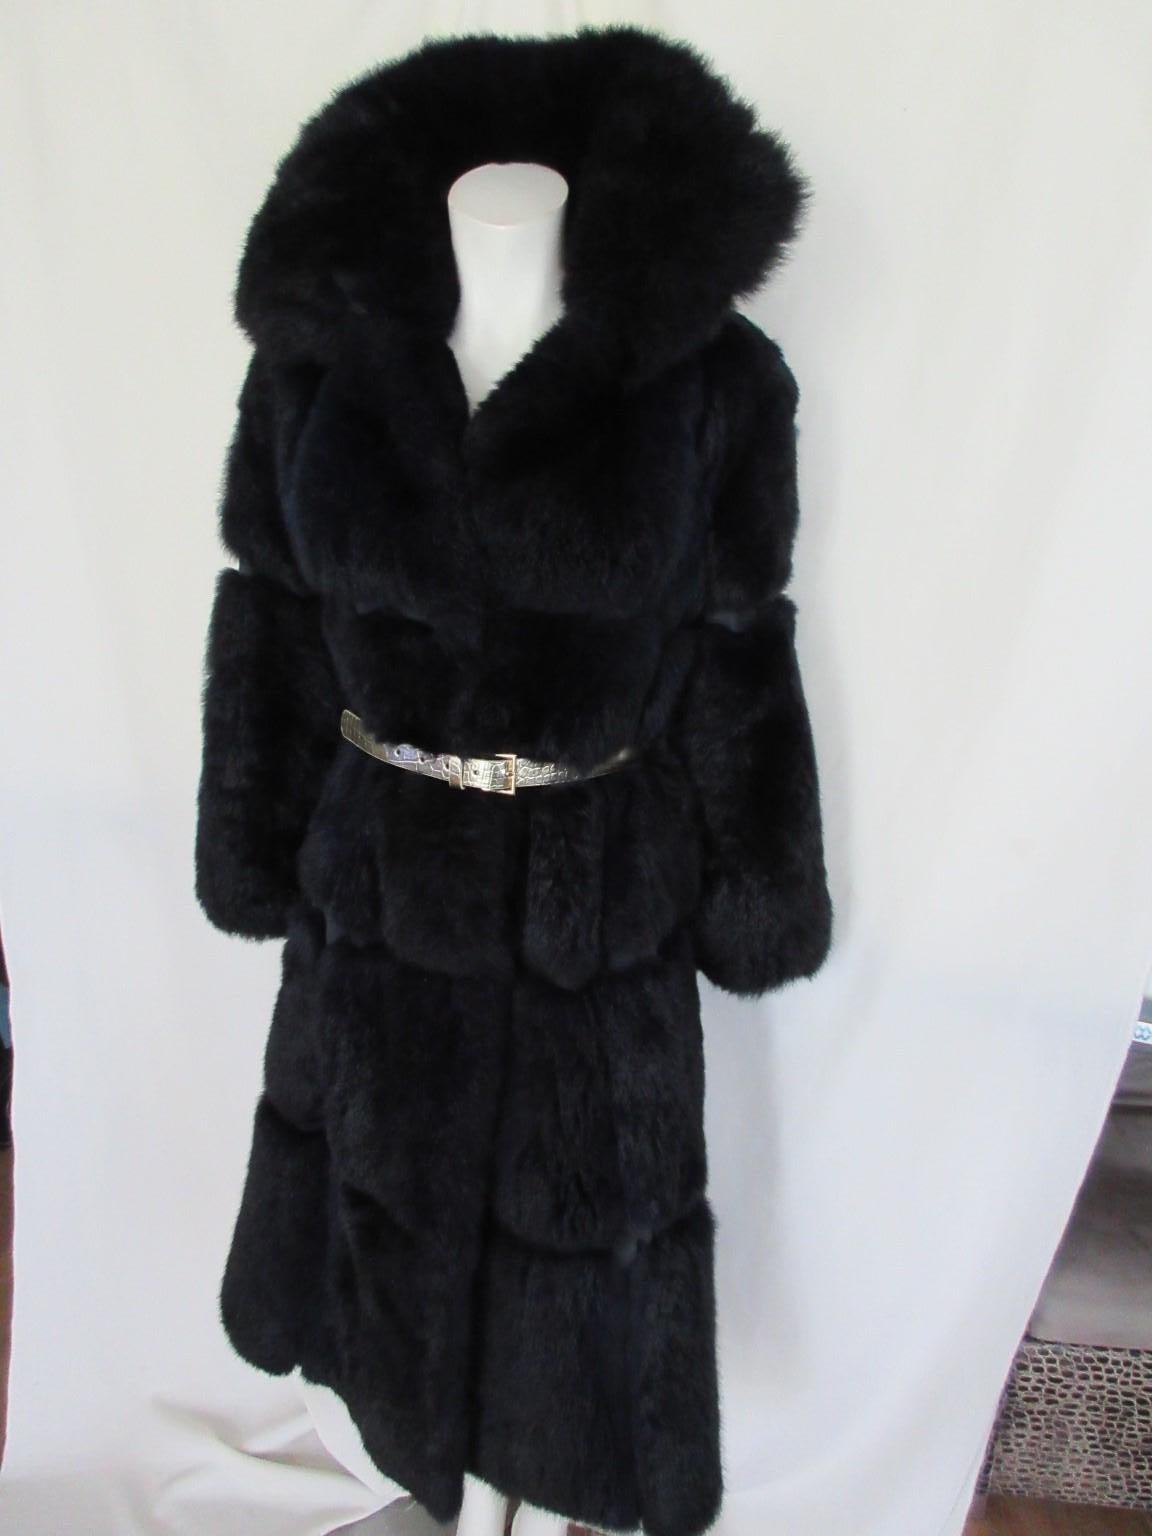 This vintage coat from Pierre Balmain is made of very soft blue dyed fur and suede leather panels.

We offer more exclusive fur items, view our frontstore

Details:
The color is dark blue with flurries of lighter blue.
With belt loops
Fully